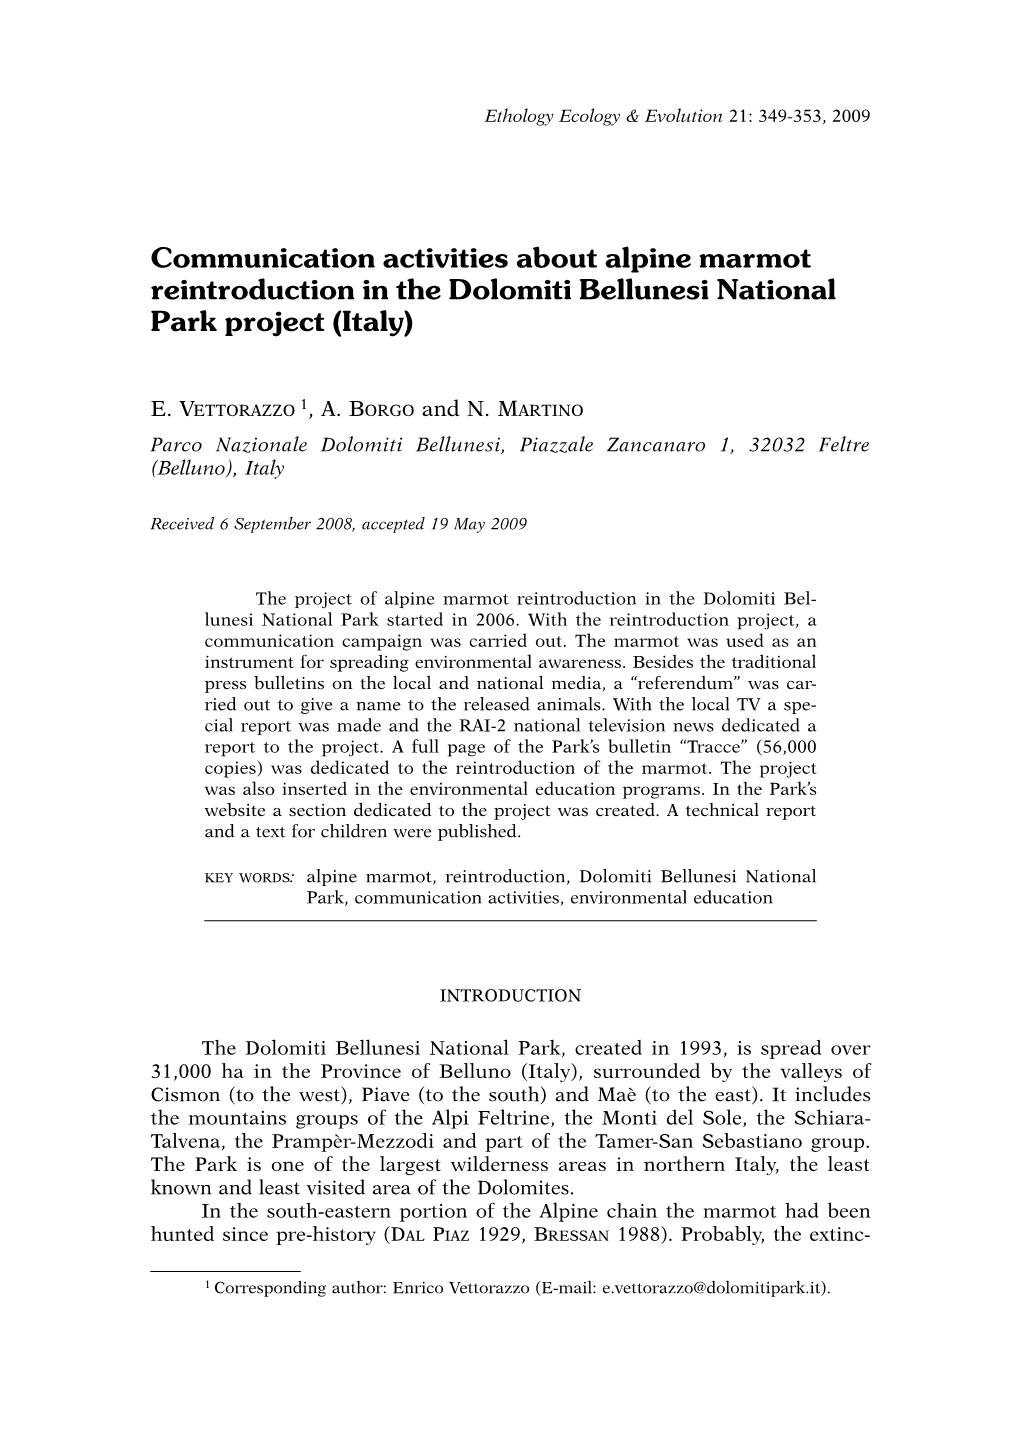 Communication Activities About Alpine Marmot Reintroduction in the Dolomiti Bellunesi National Park Project (Italy)